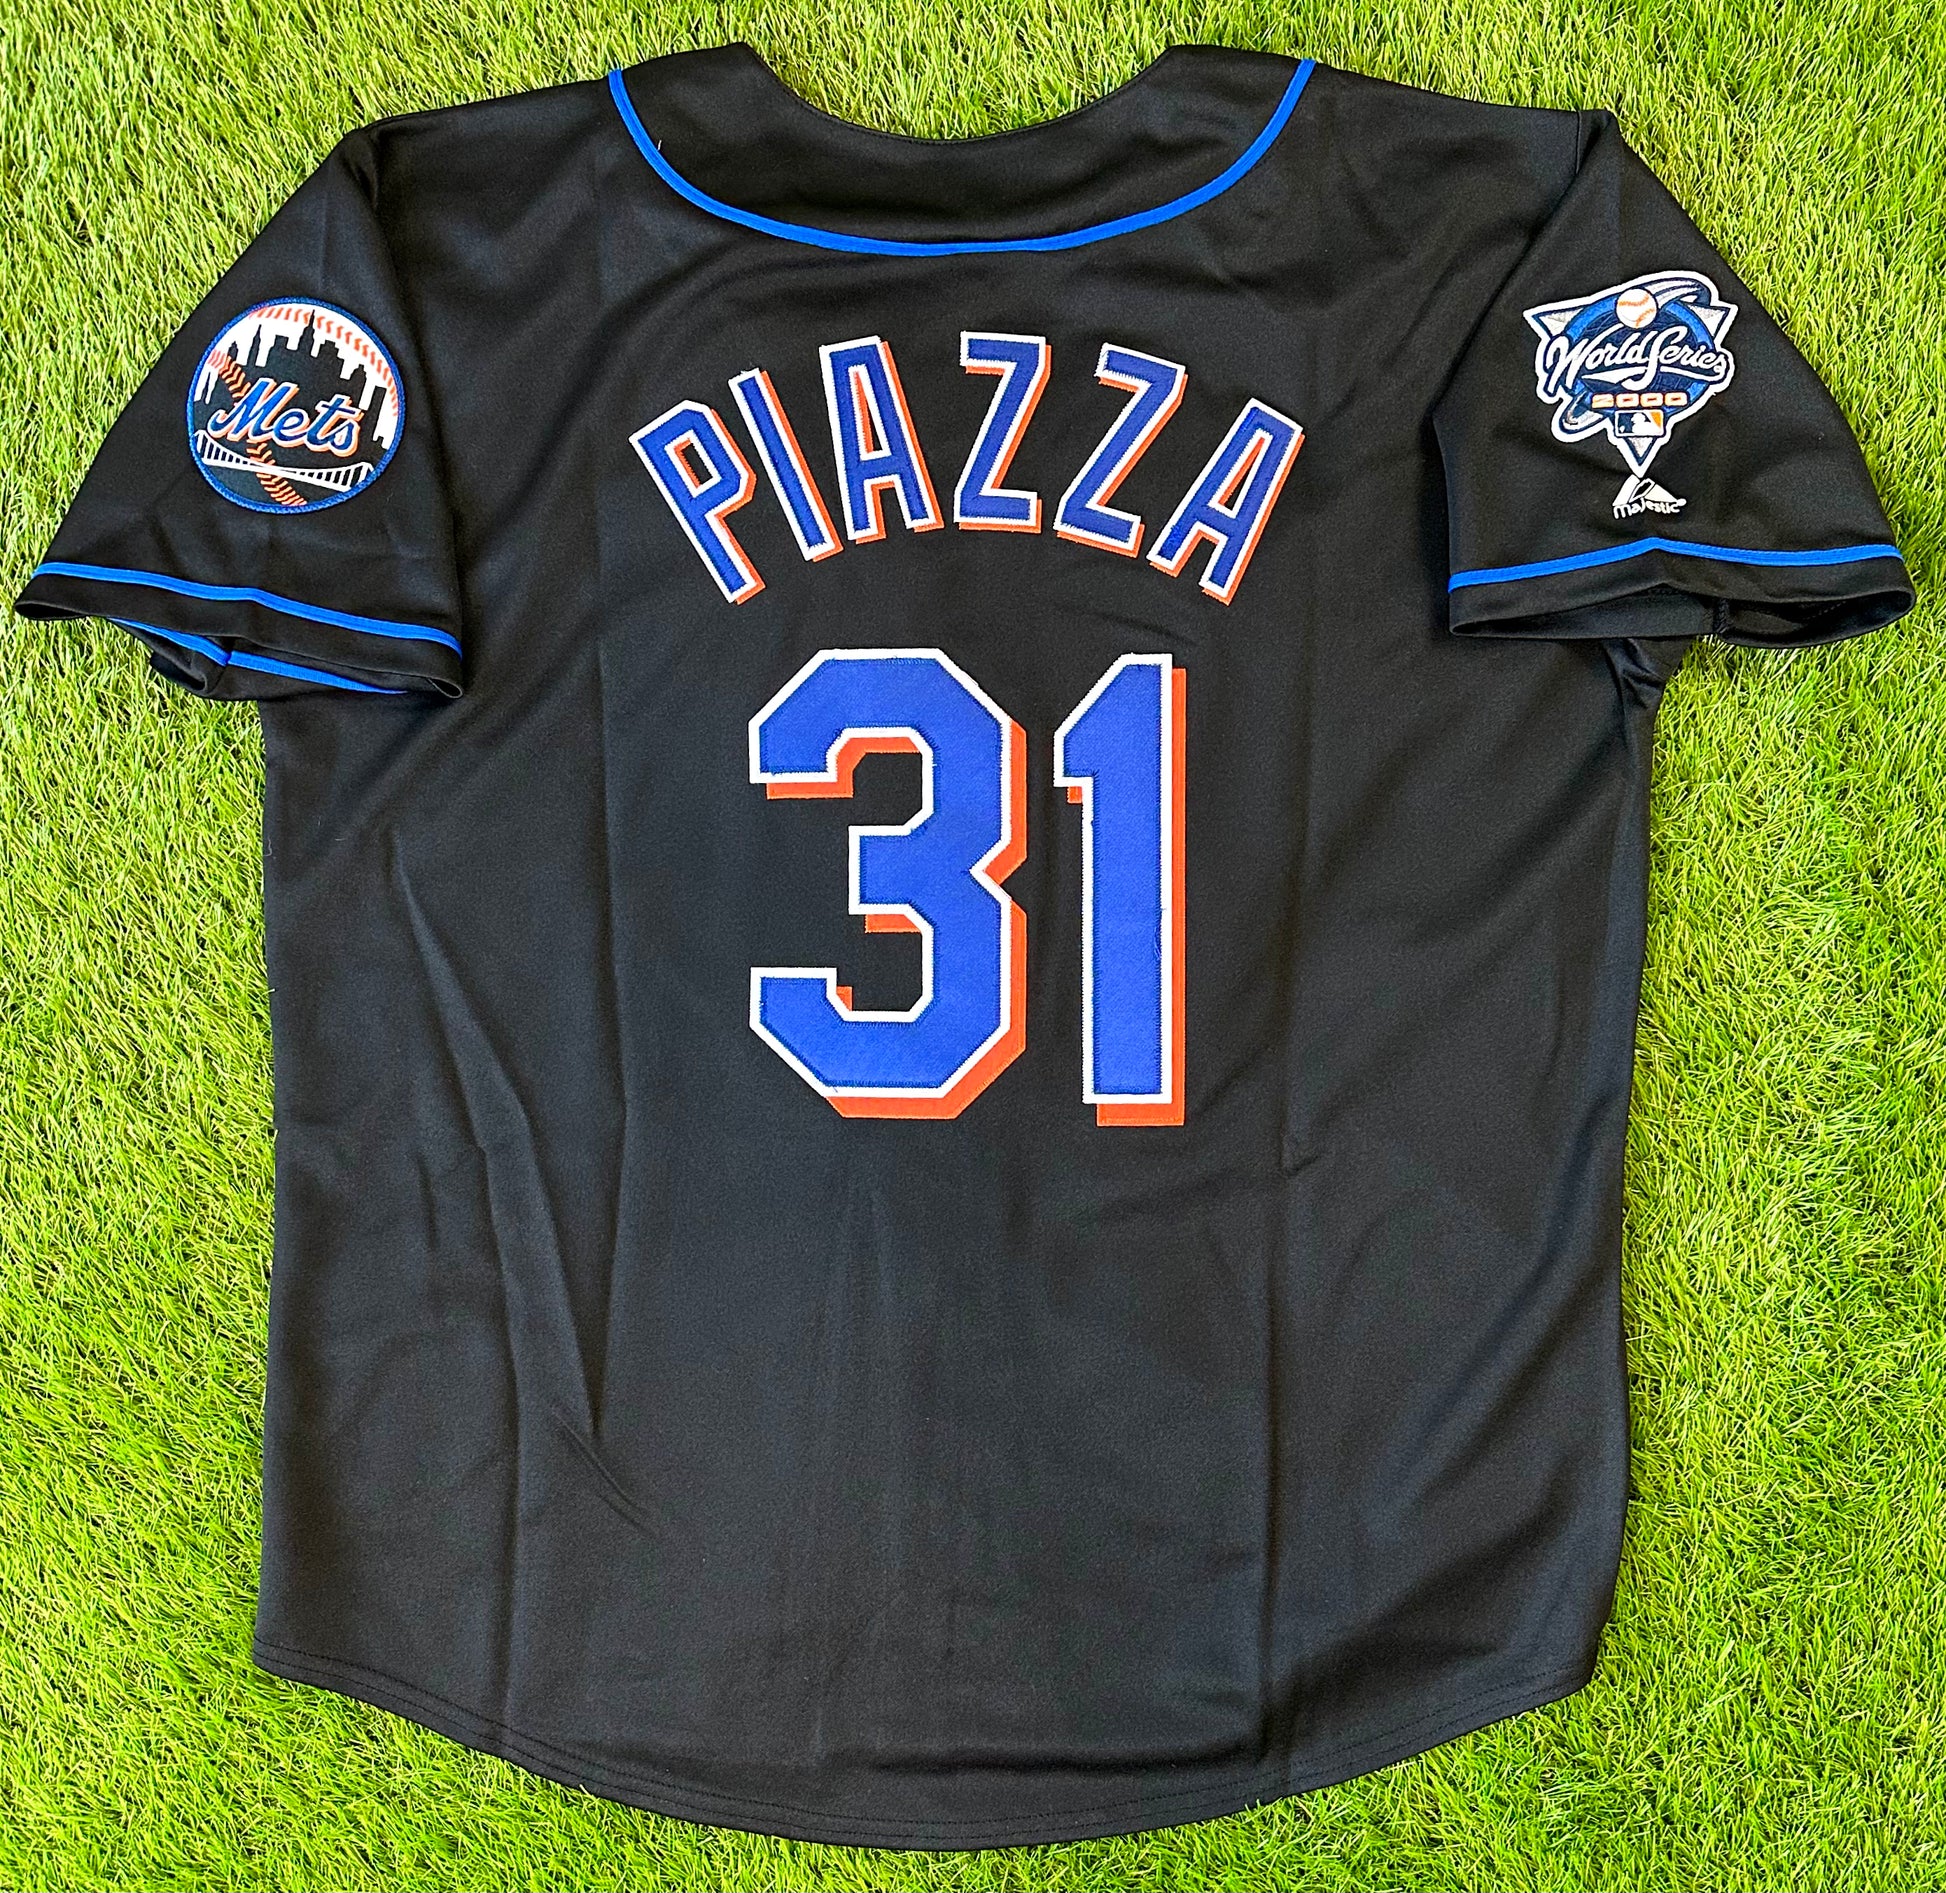 Mike Piazza New York Mets 2000 Home Baseball Throwback Jersey 